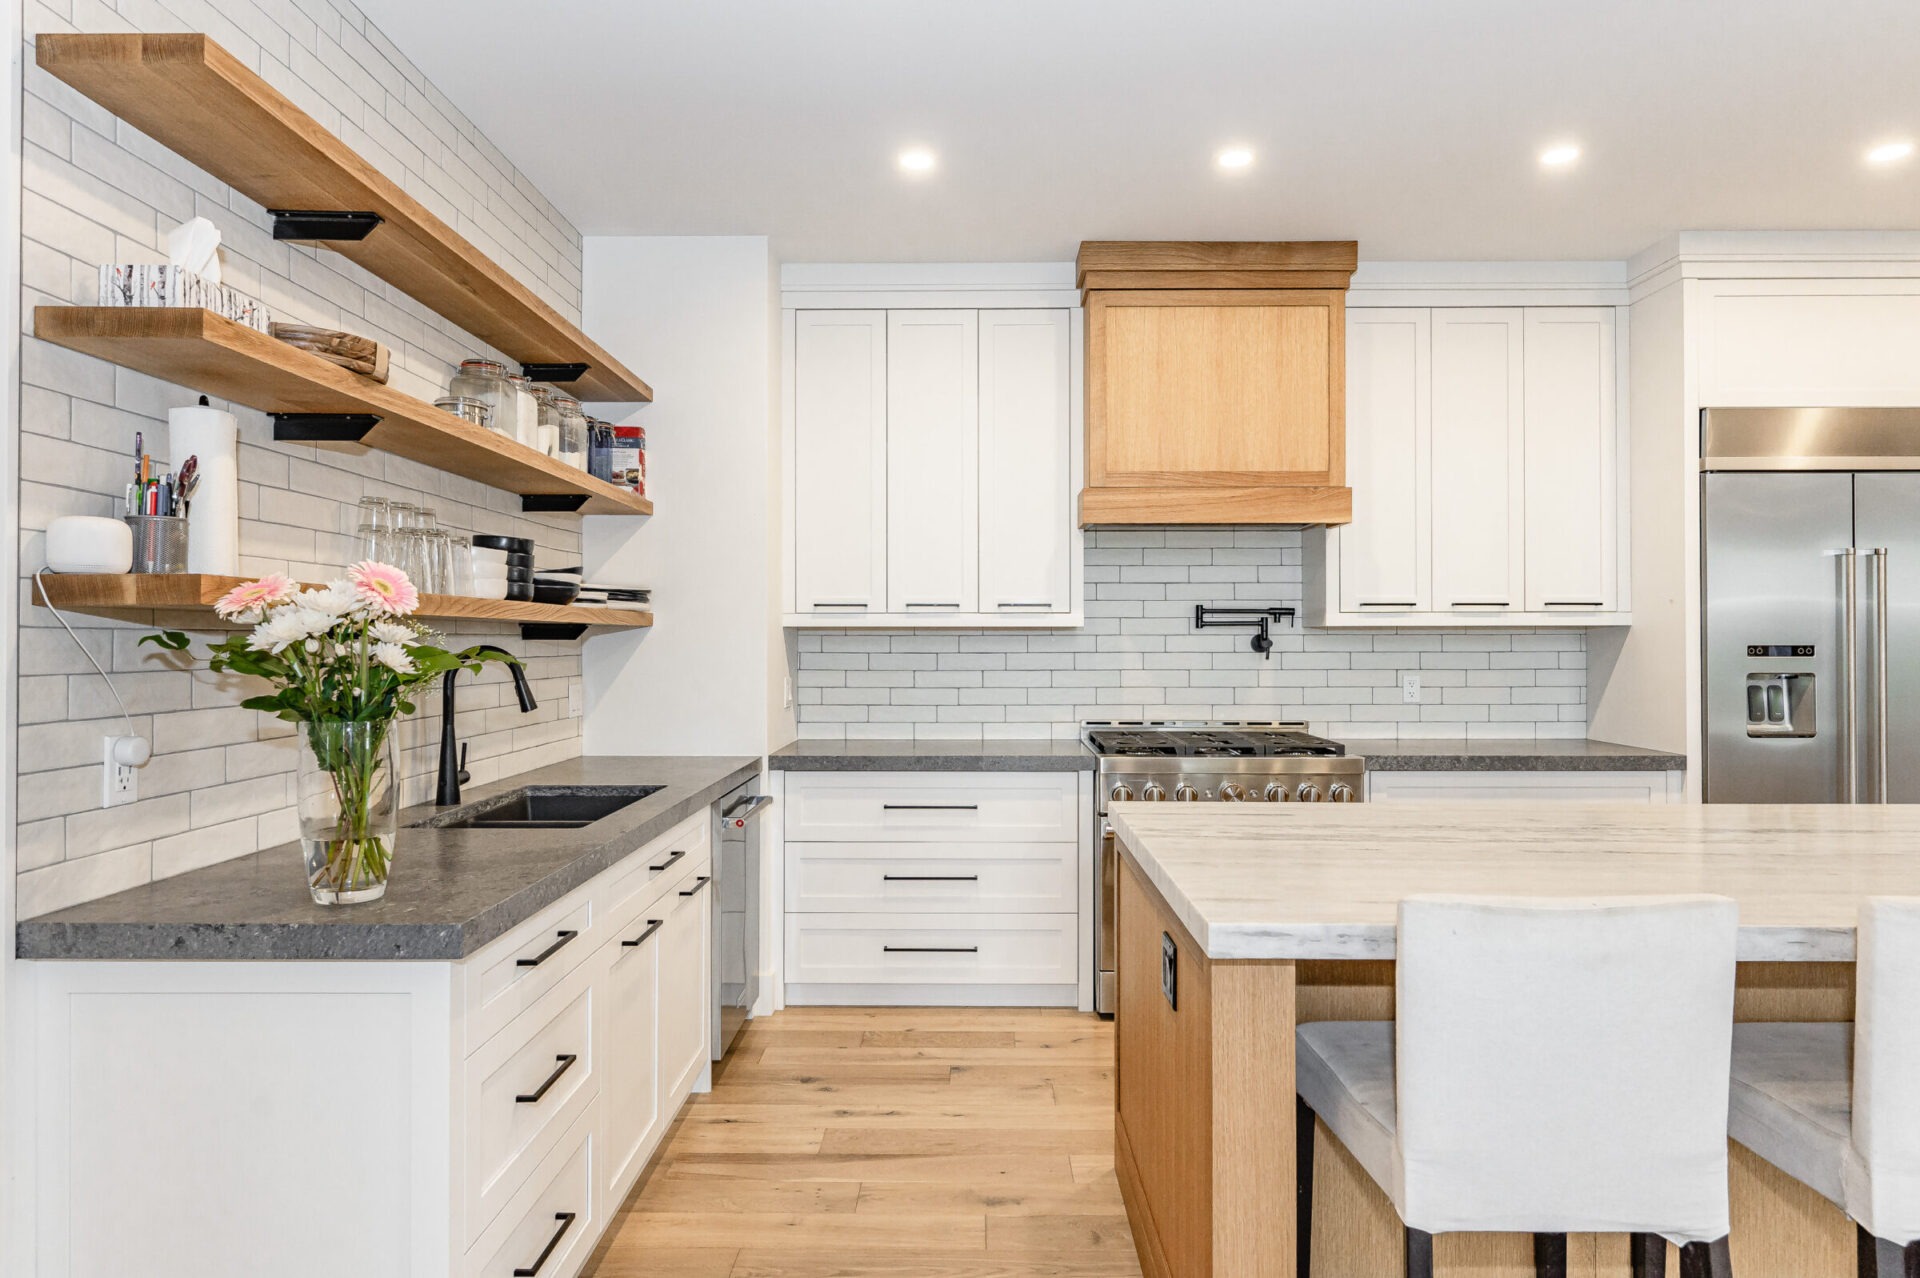 A modern kitchen with white cabinetry, stainless steel appliances, floating wooden shelves, a subway tile backsplash, and an island with seating.